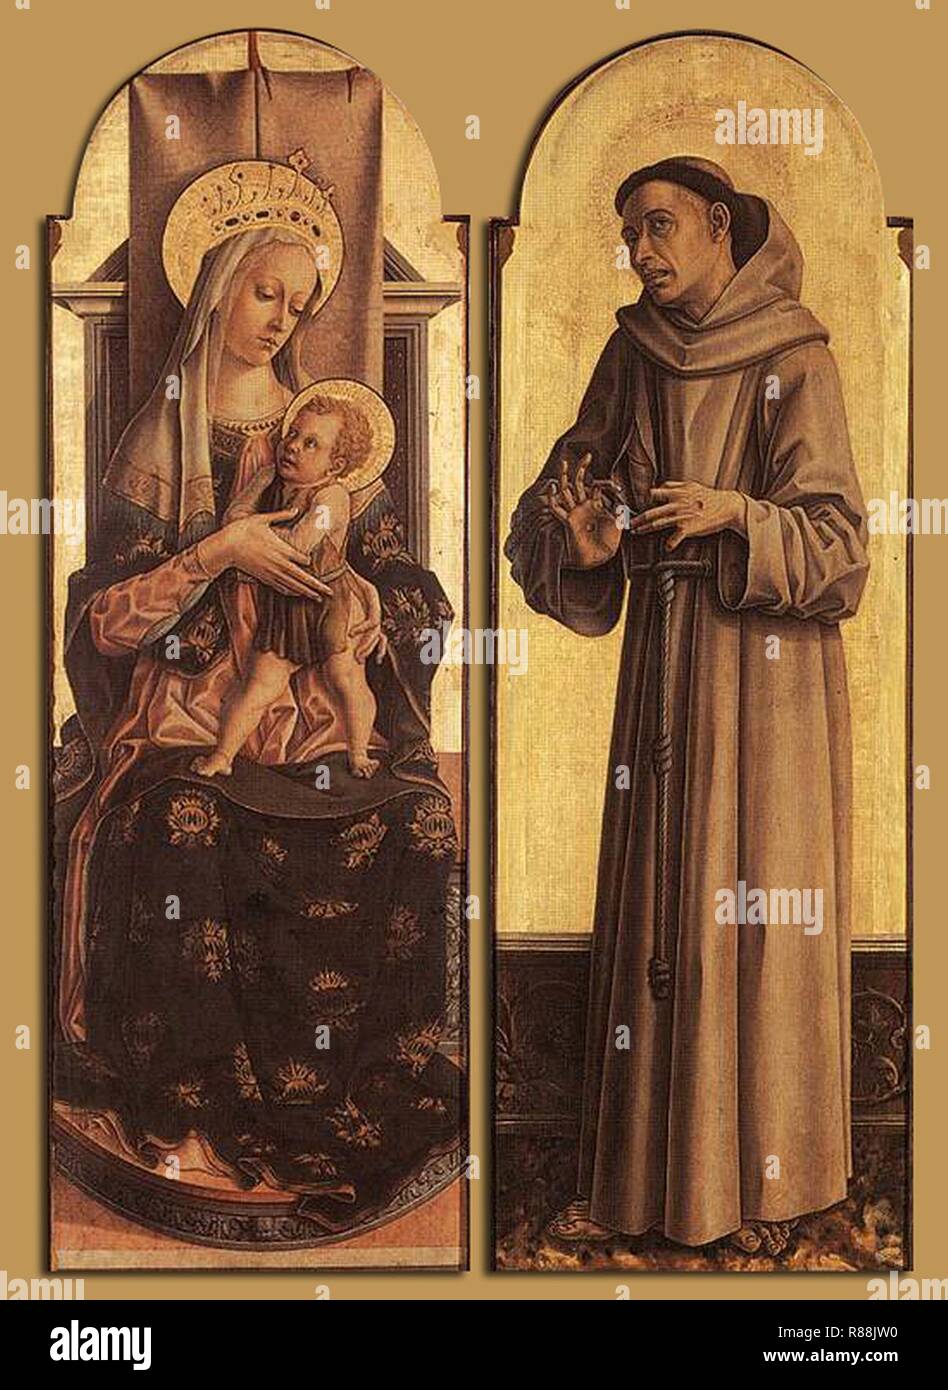 Carlo Crivelli - Madonna and Child; St Francis of Assisi - Stock Photo